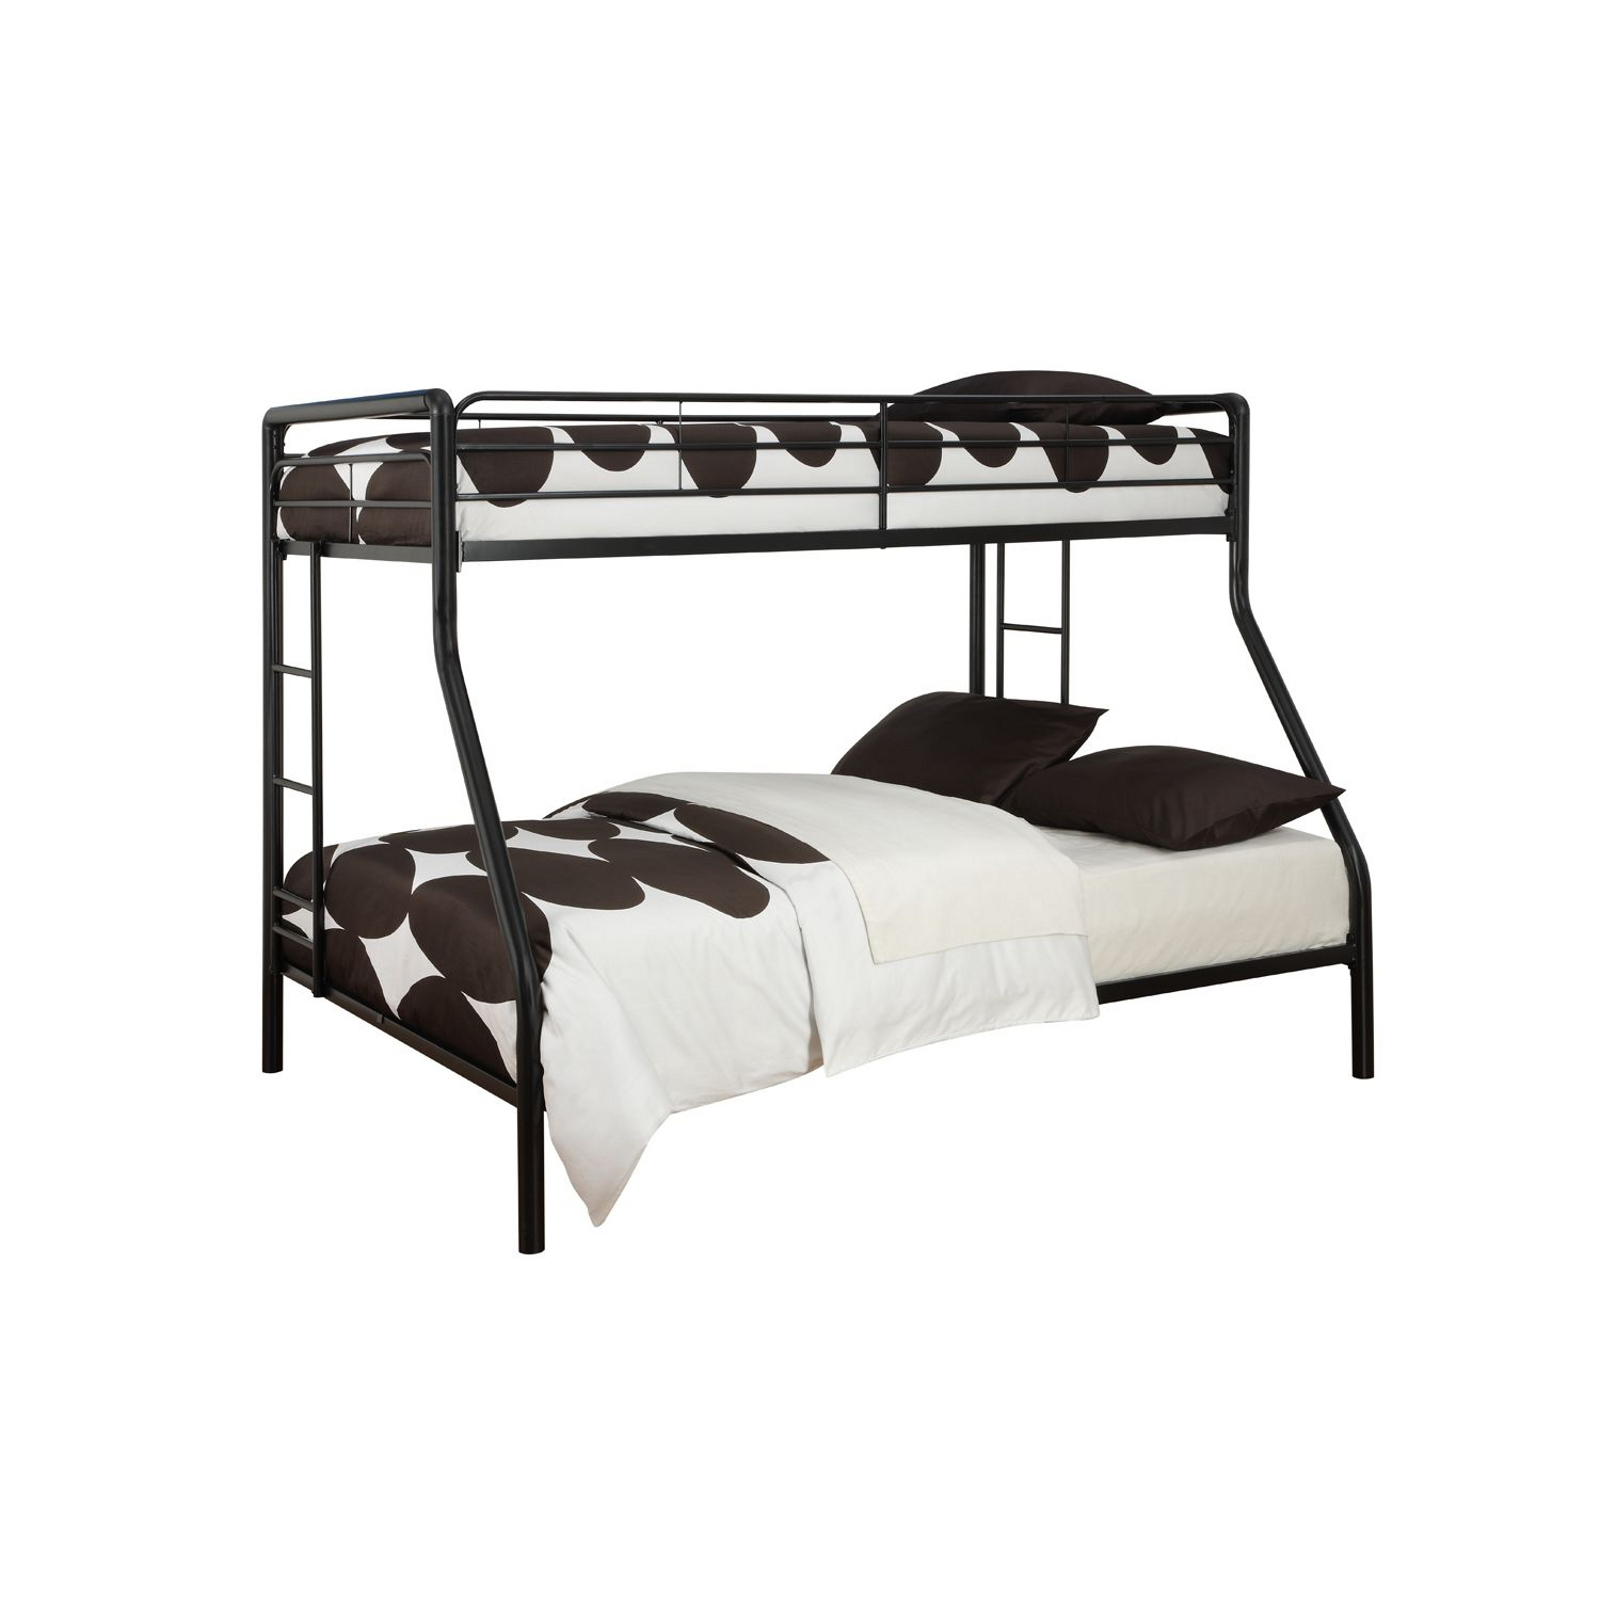 Upc 029986321718 Essential Home Bunk, Ameriwood Twin Over Full Bunk Bed In Black